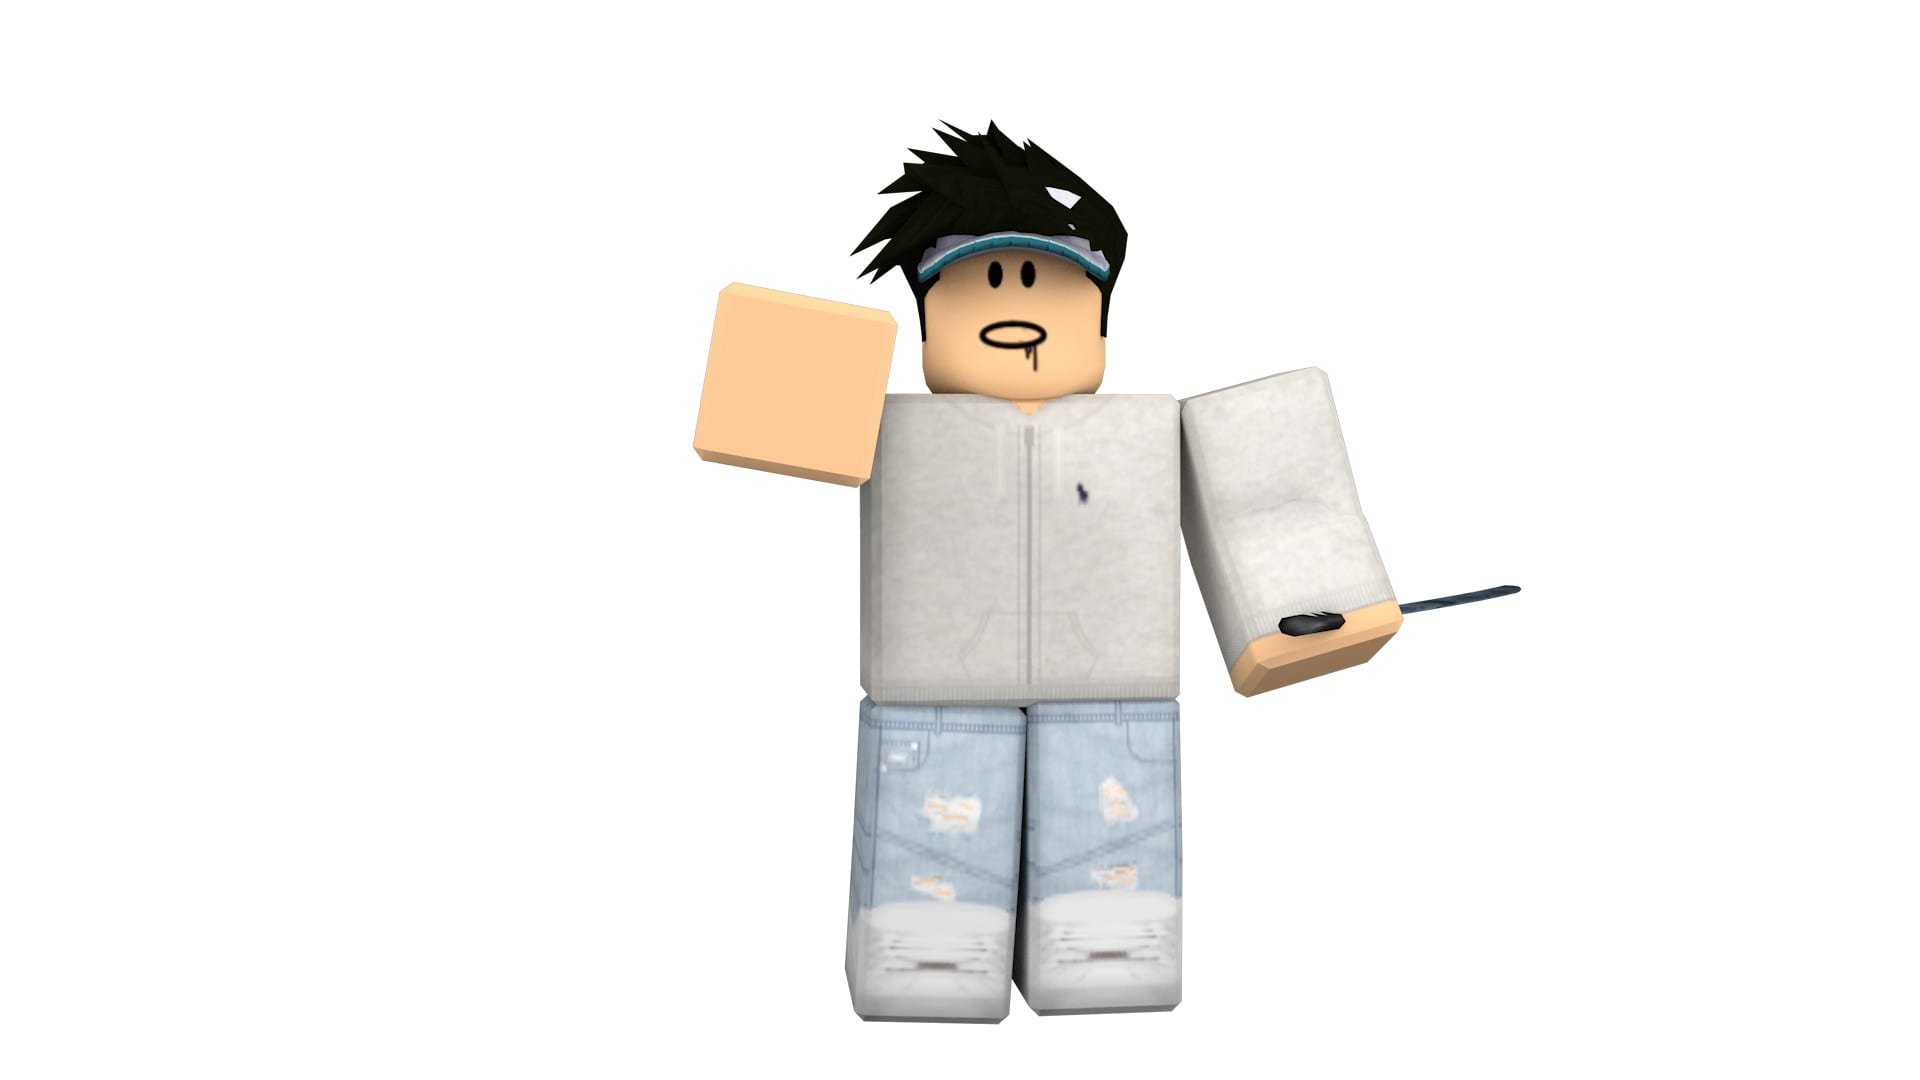 Get Your Own Roblox Gfx By Fruitymoon - get your own roblox gfx by fruitymoon